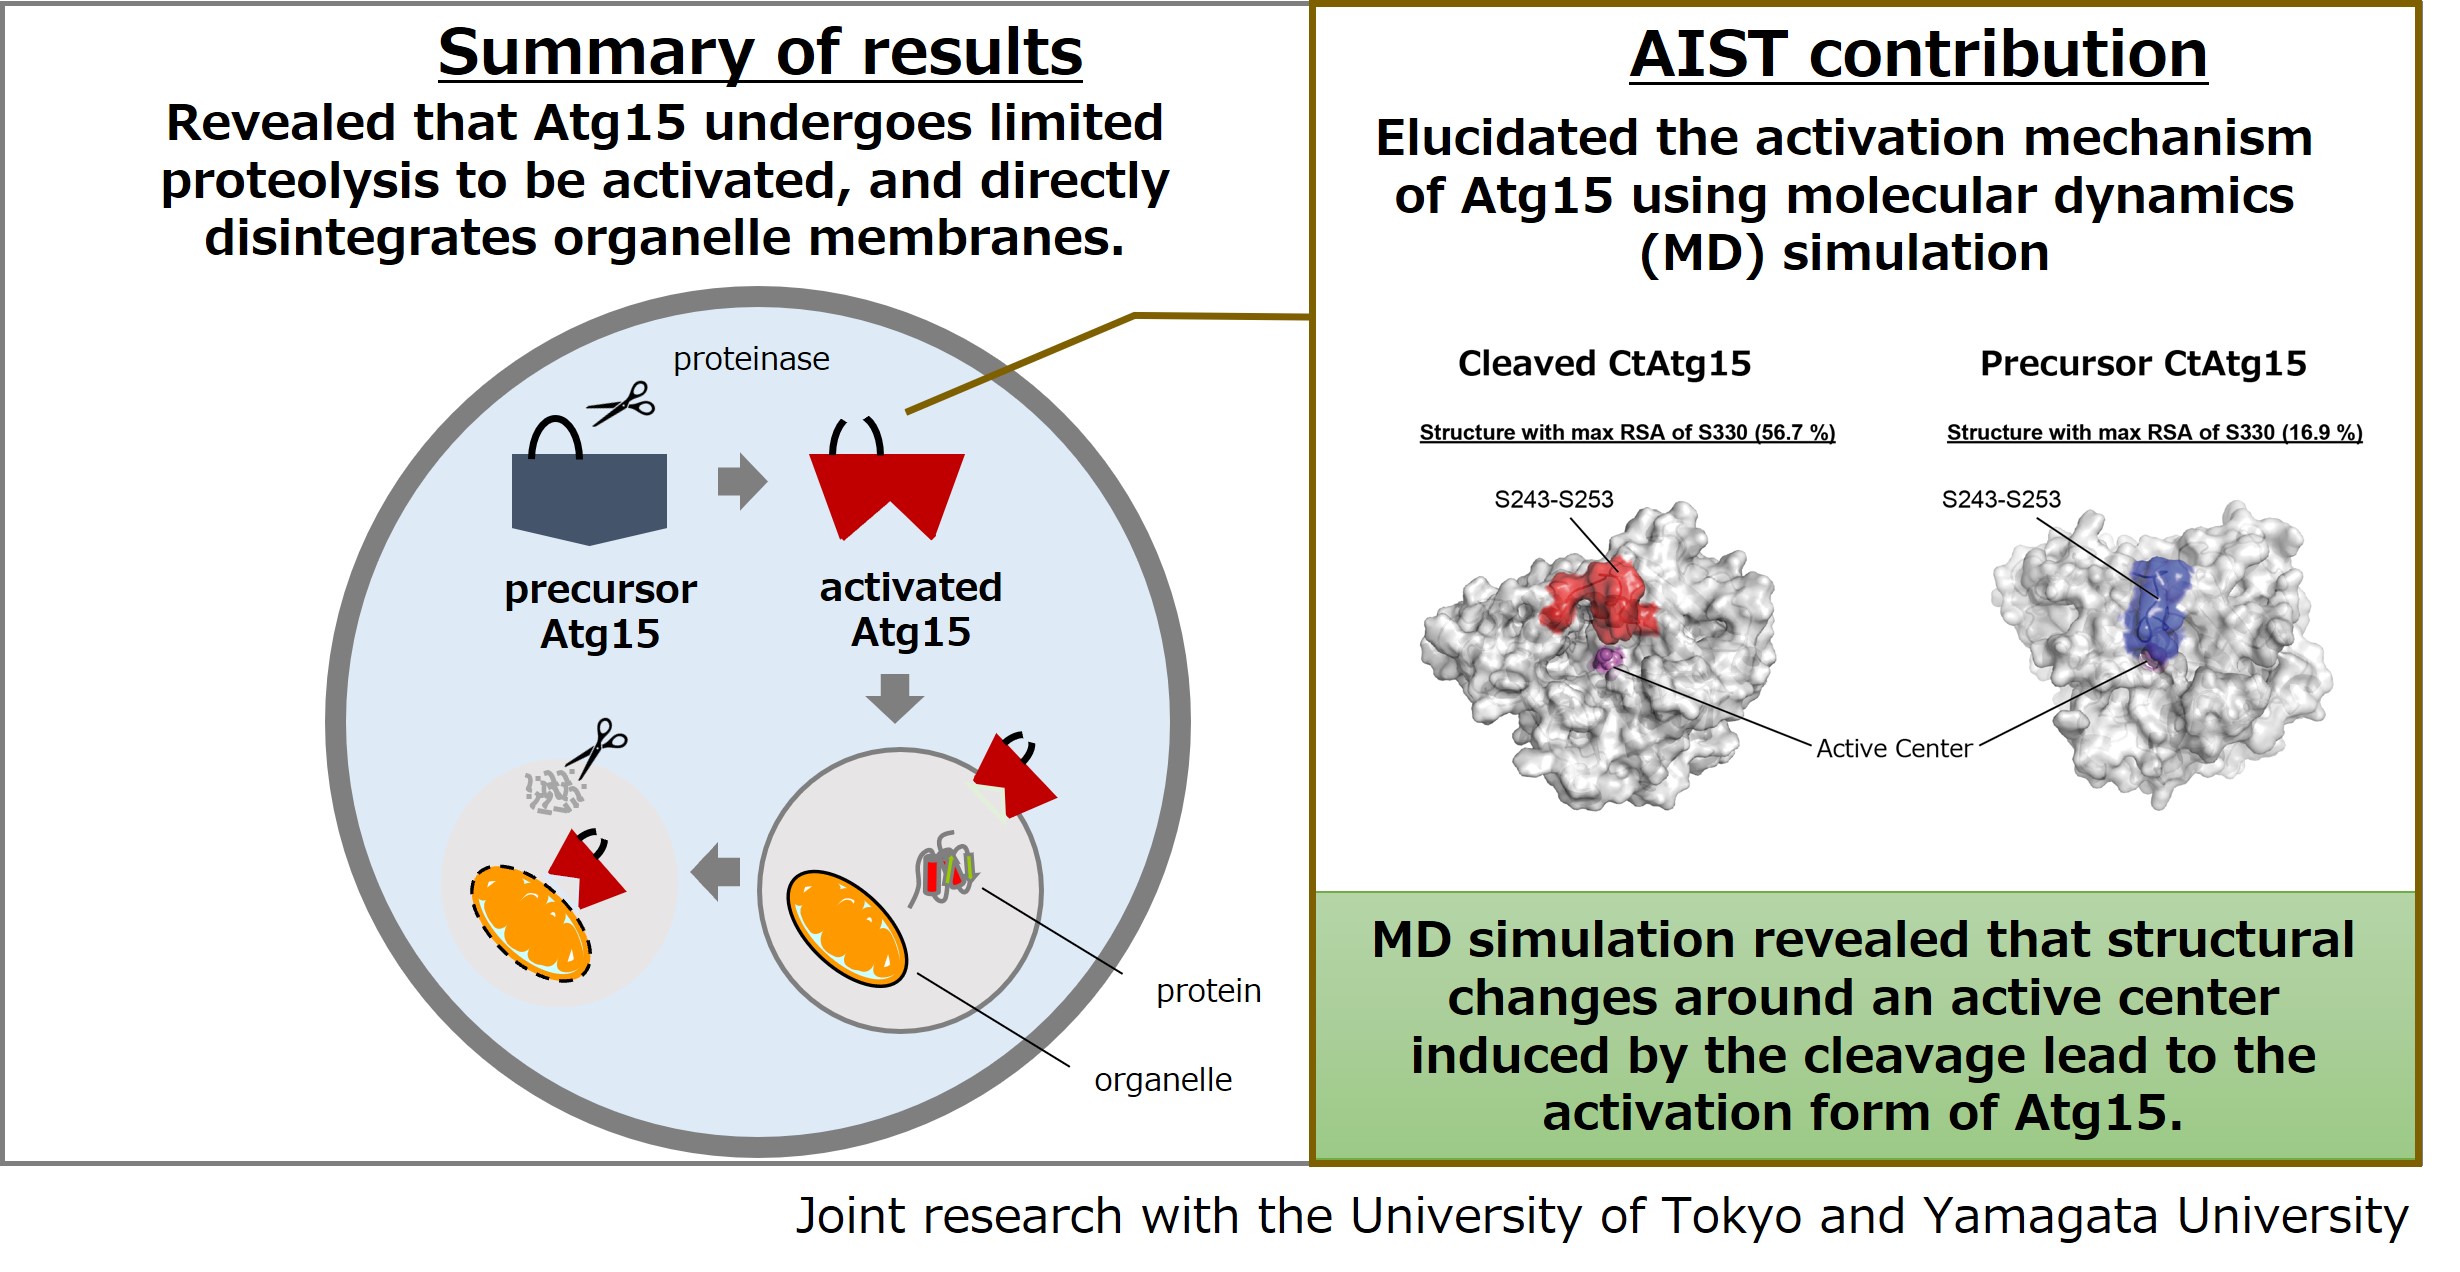 the activation mechanism of lipase Atg15